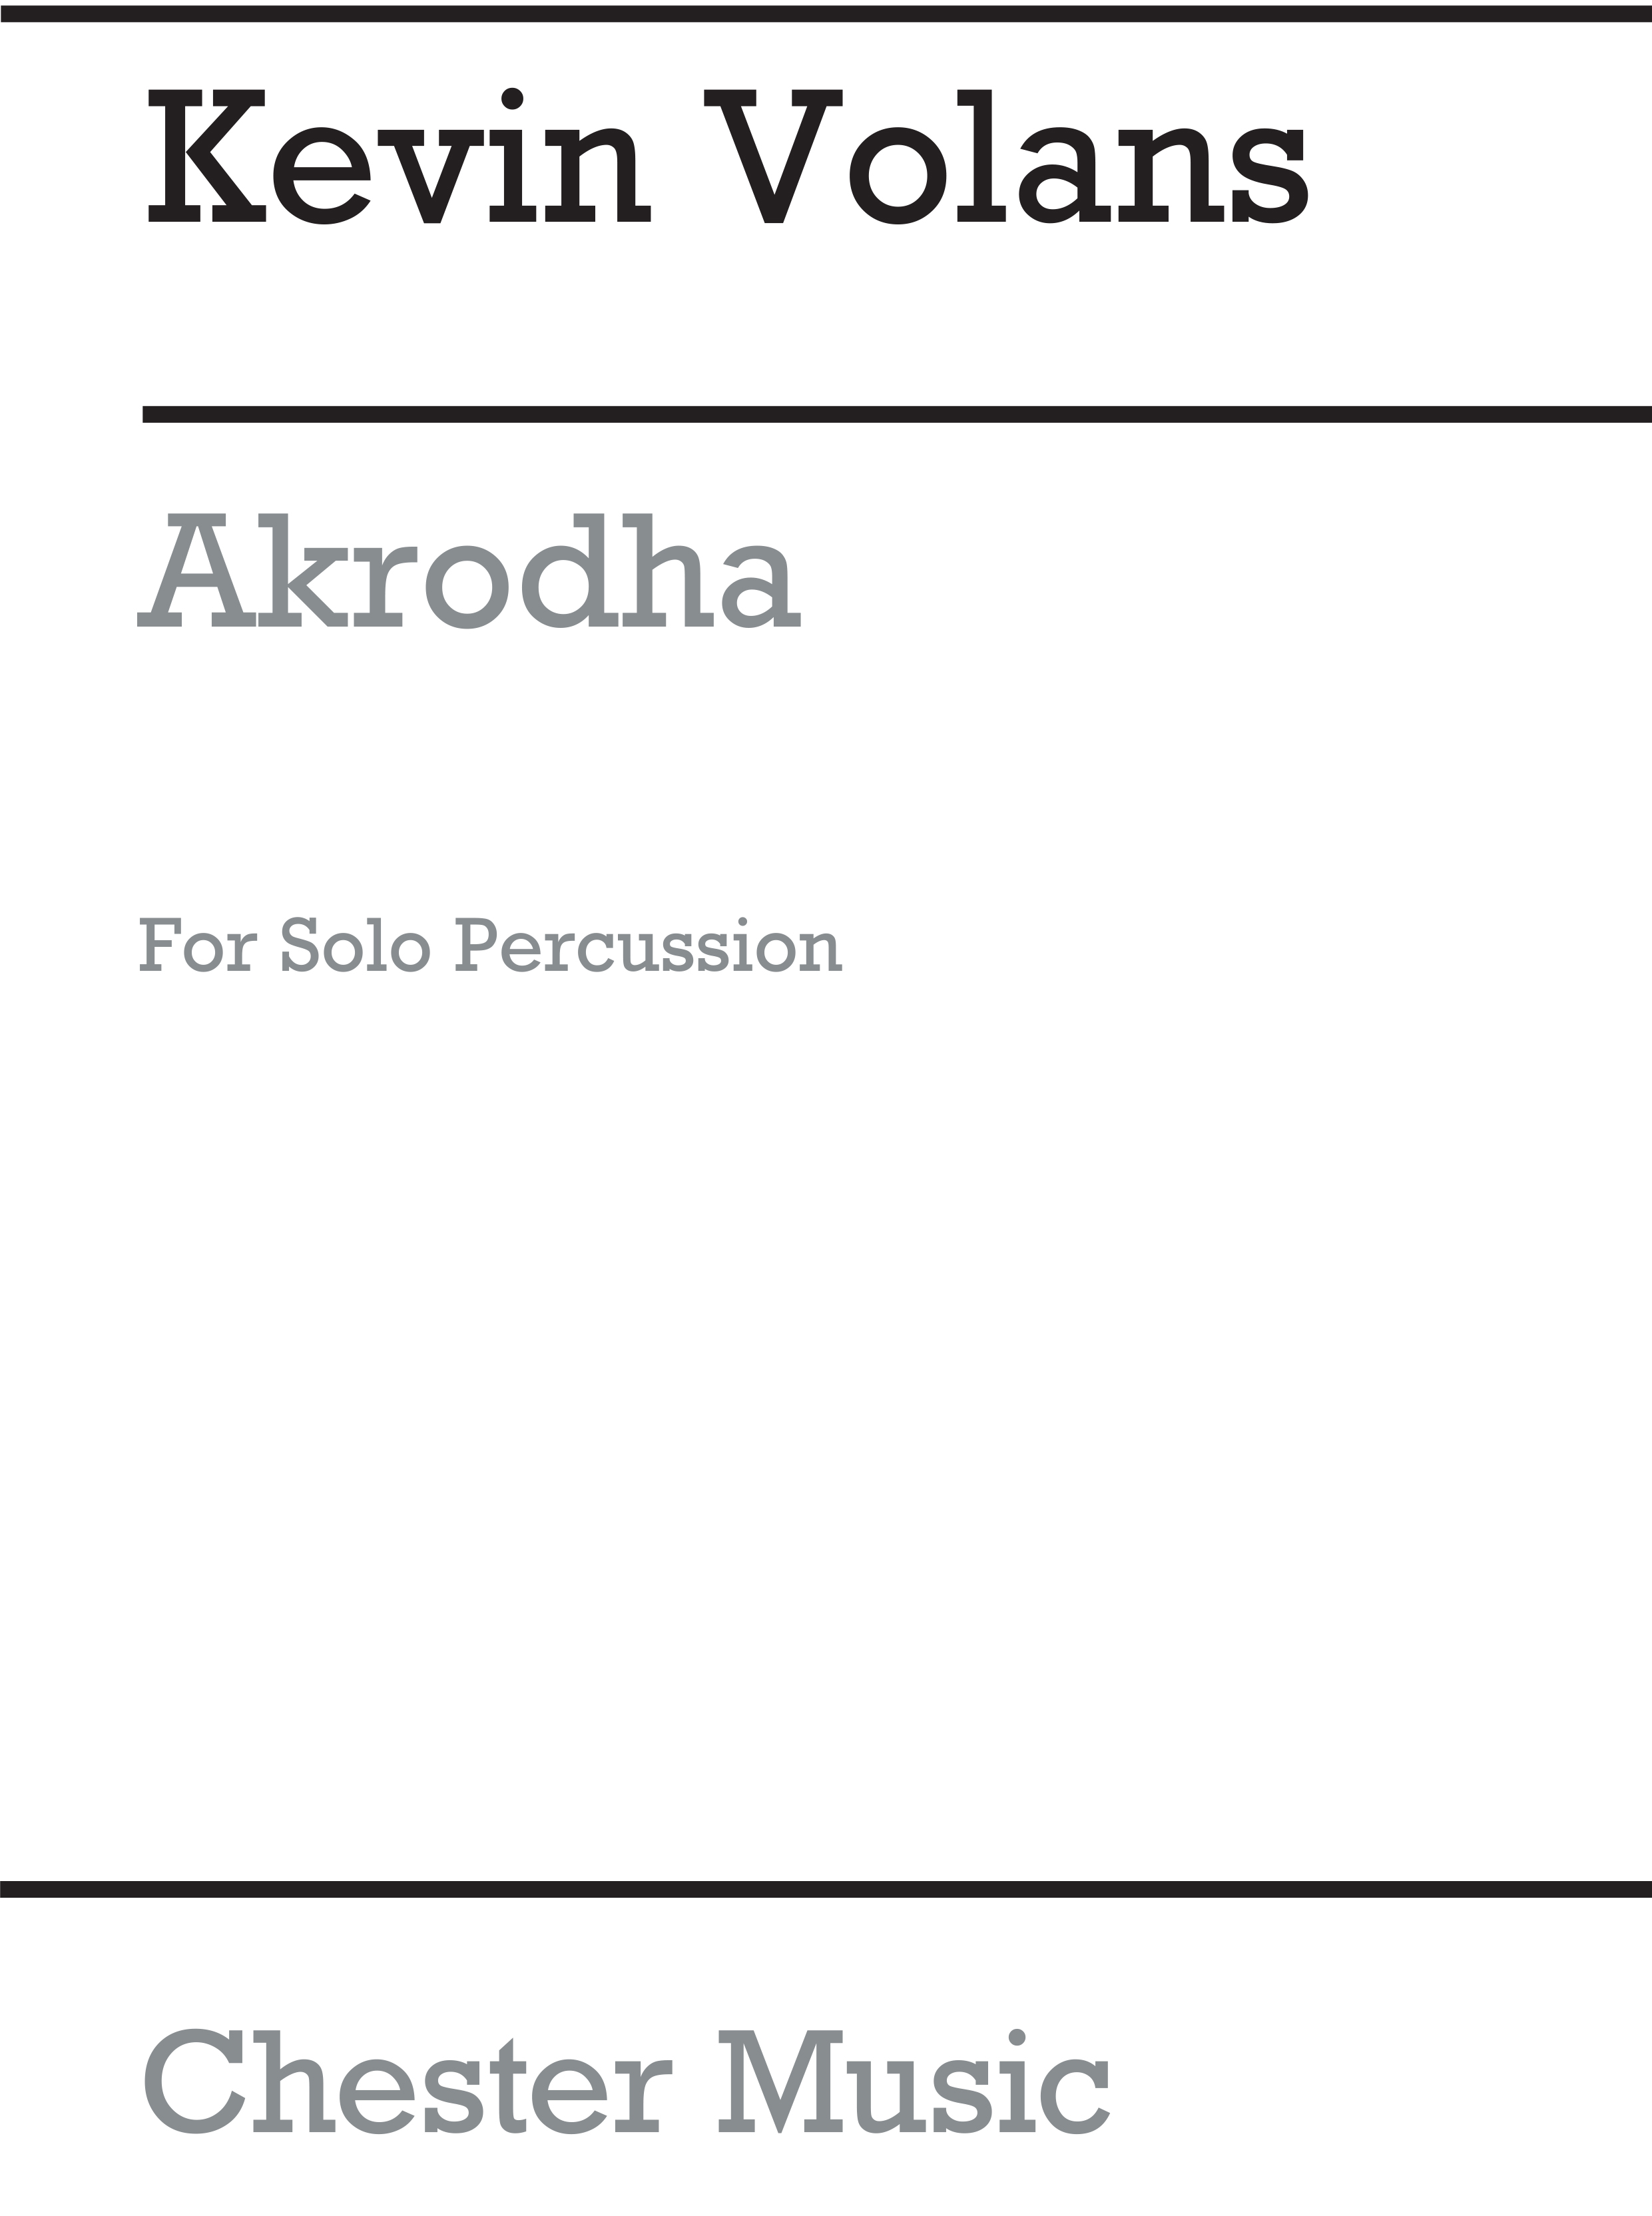 Kevin Volans: Akrodha For Solo Percussion